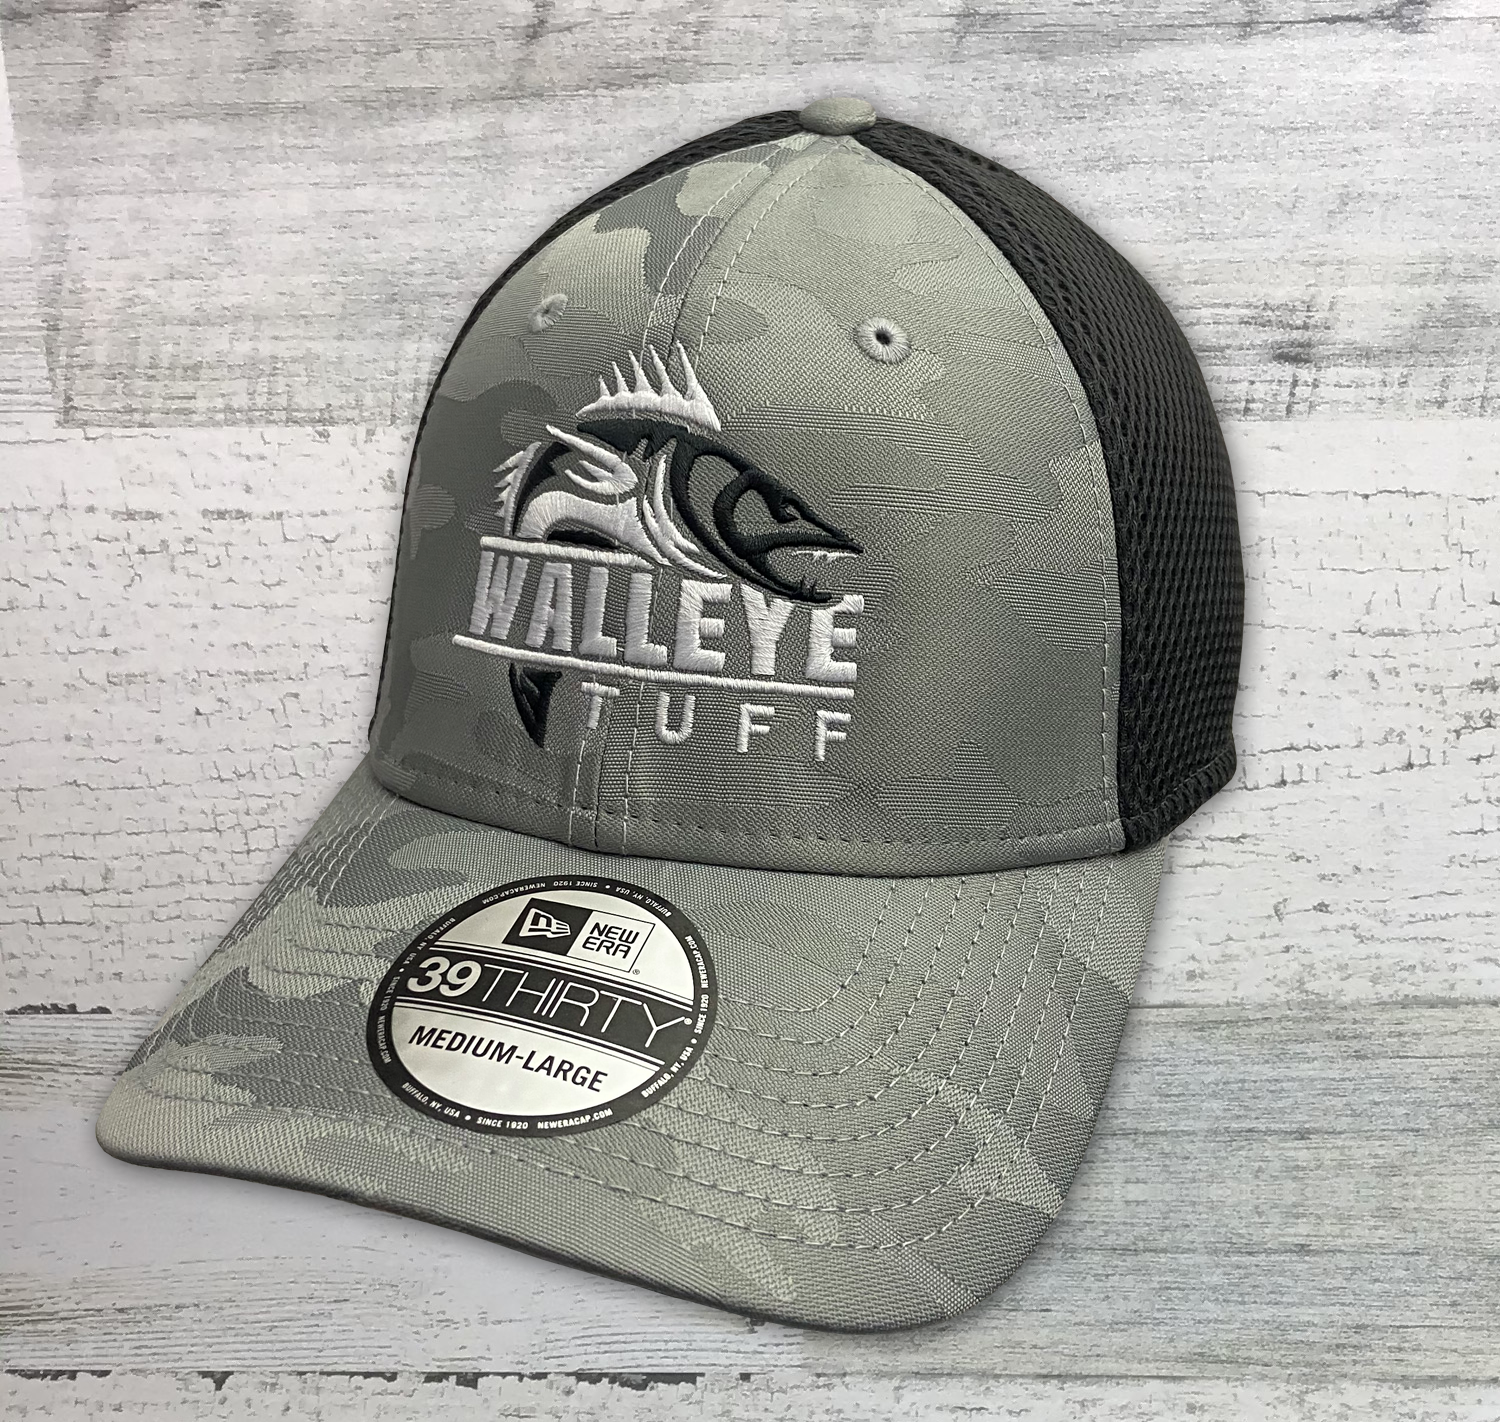 Purchase Catfish Hats and Fitted Fishing Hat Online Tagged walleye tuff -  Hook & Drag